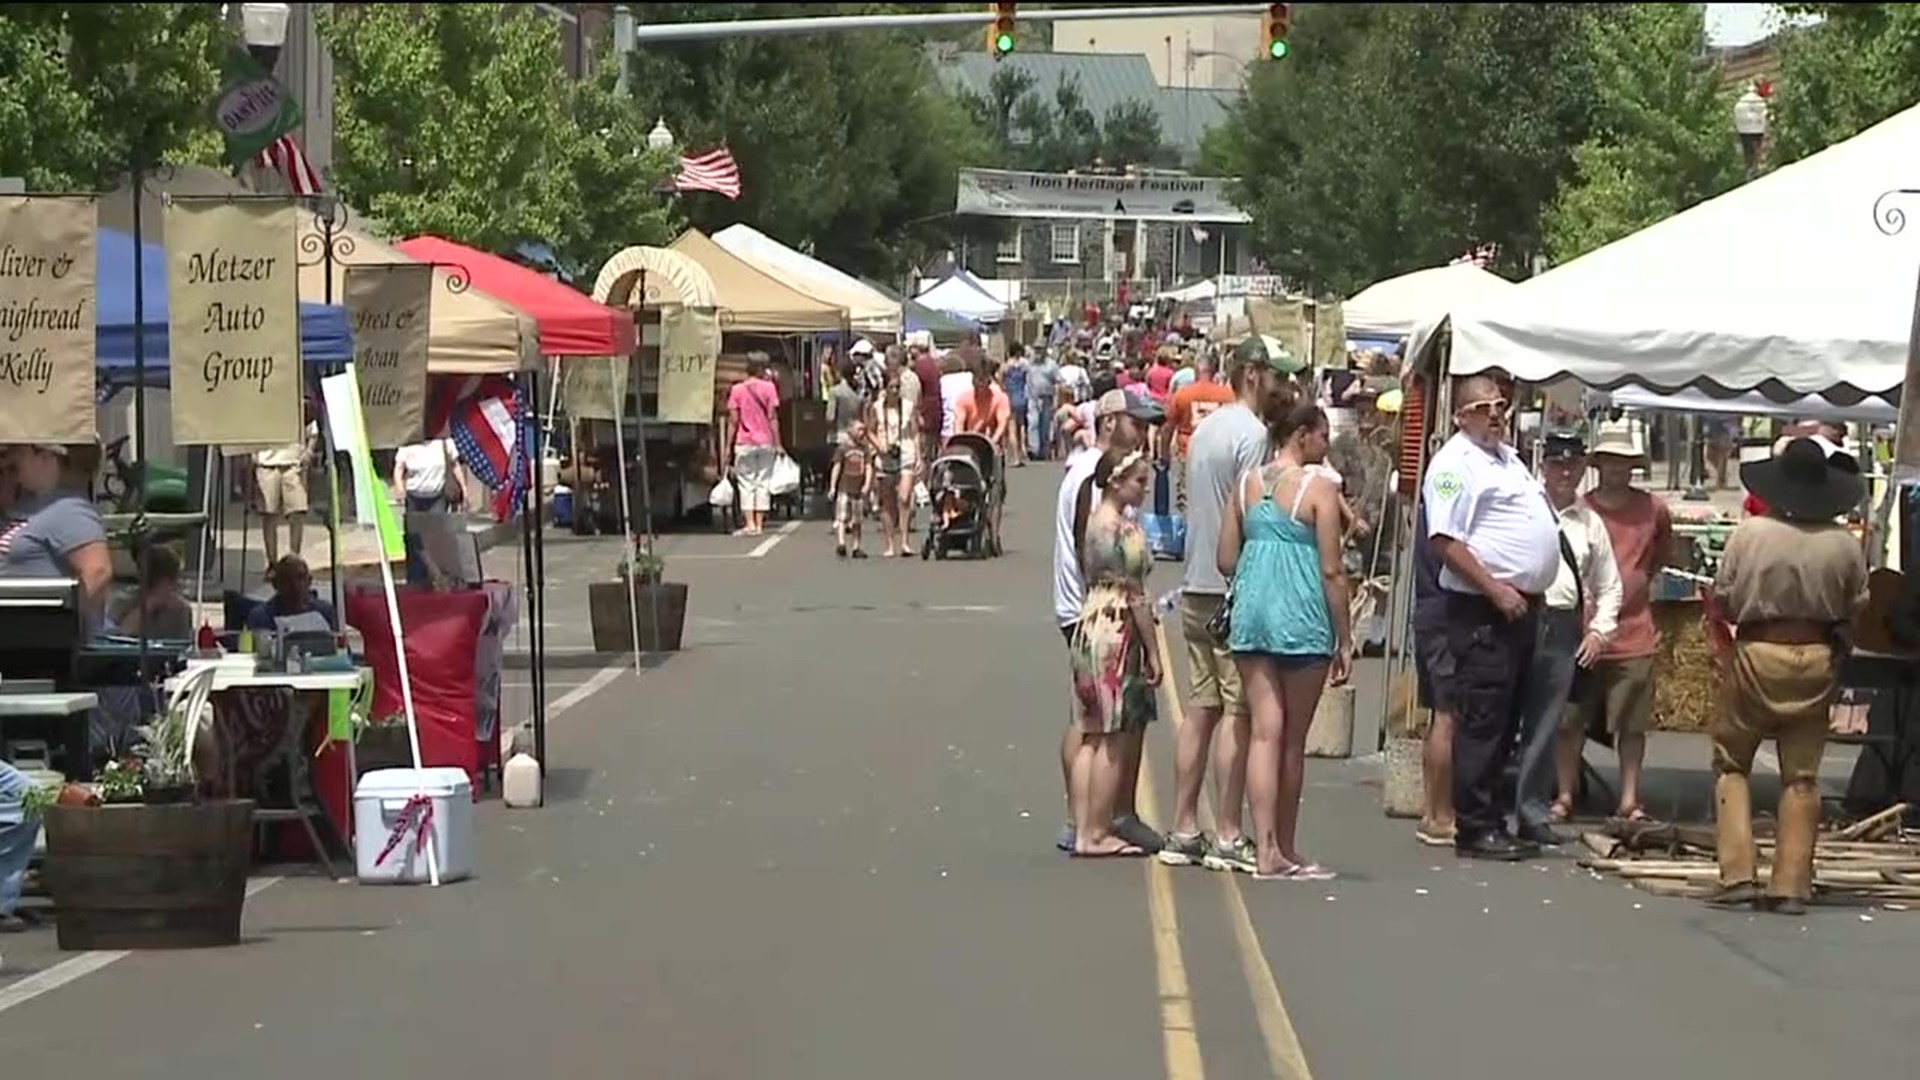 Danville will welcome people from all over our area this weekend as two big festivals take place. Newswatch 16's Chris Keating tells us what's in store.